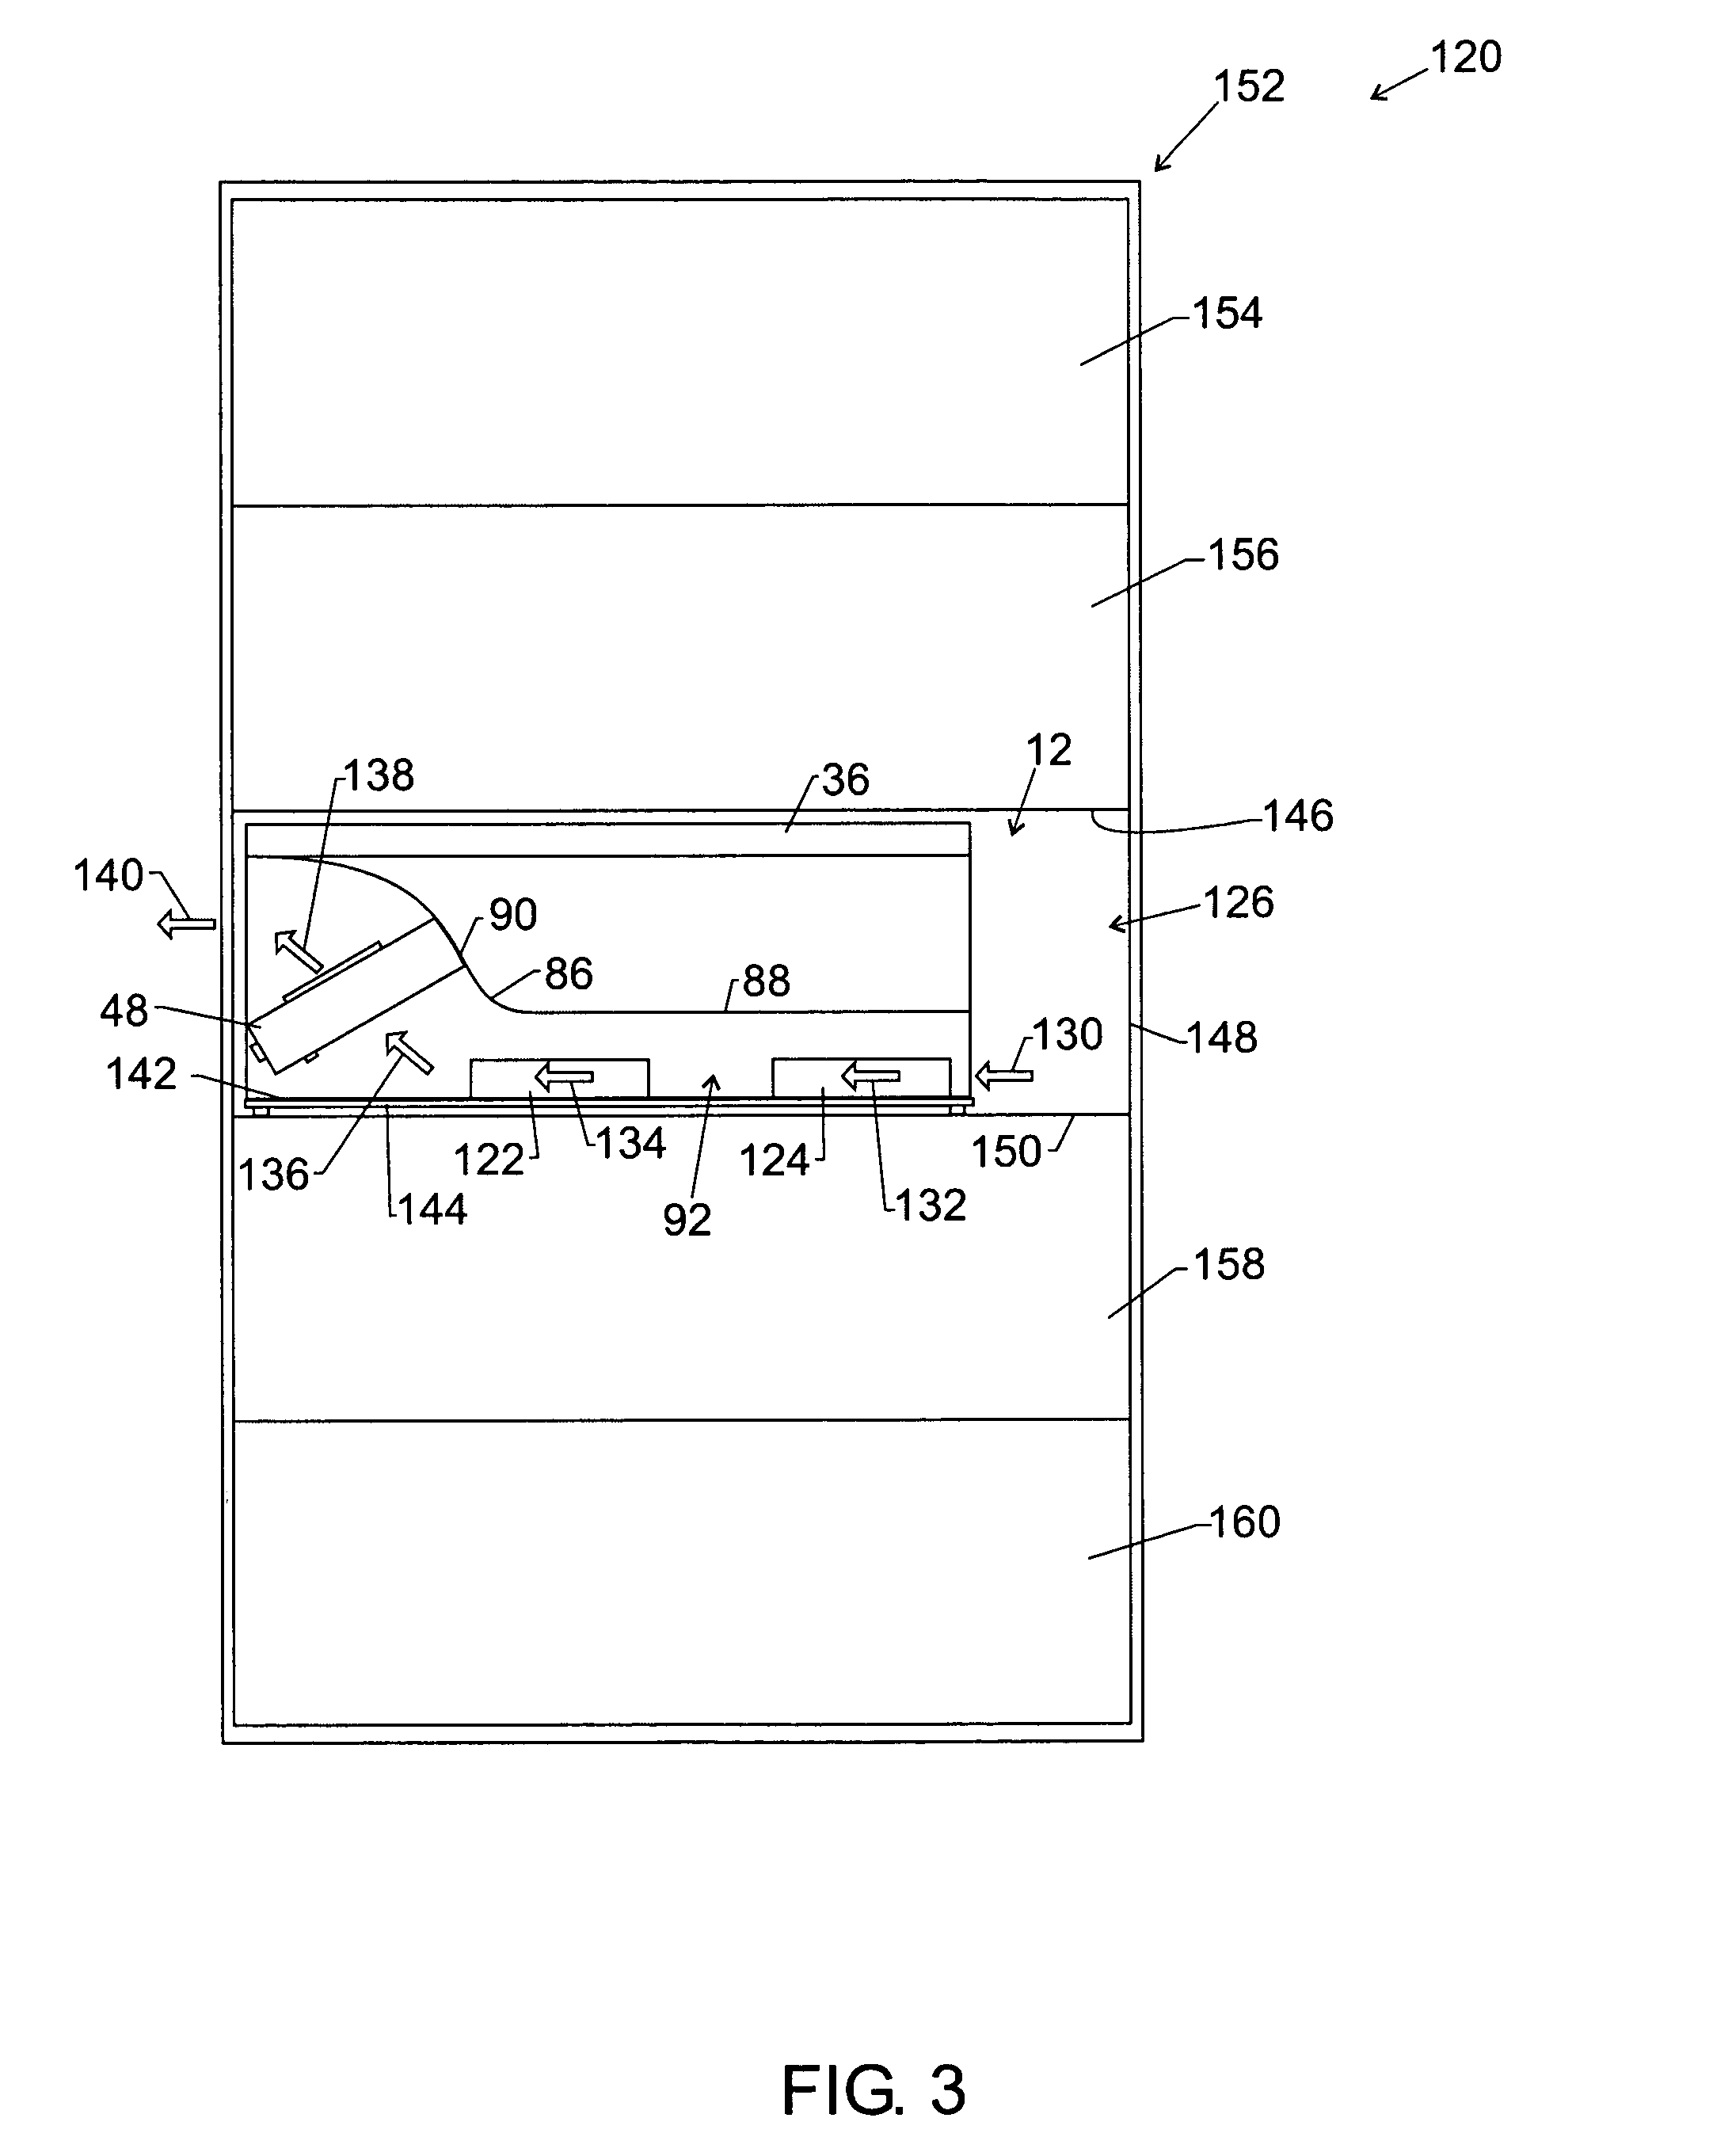 System and method for cooling components in an electronic device